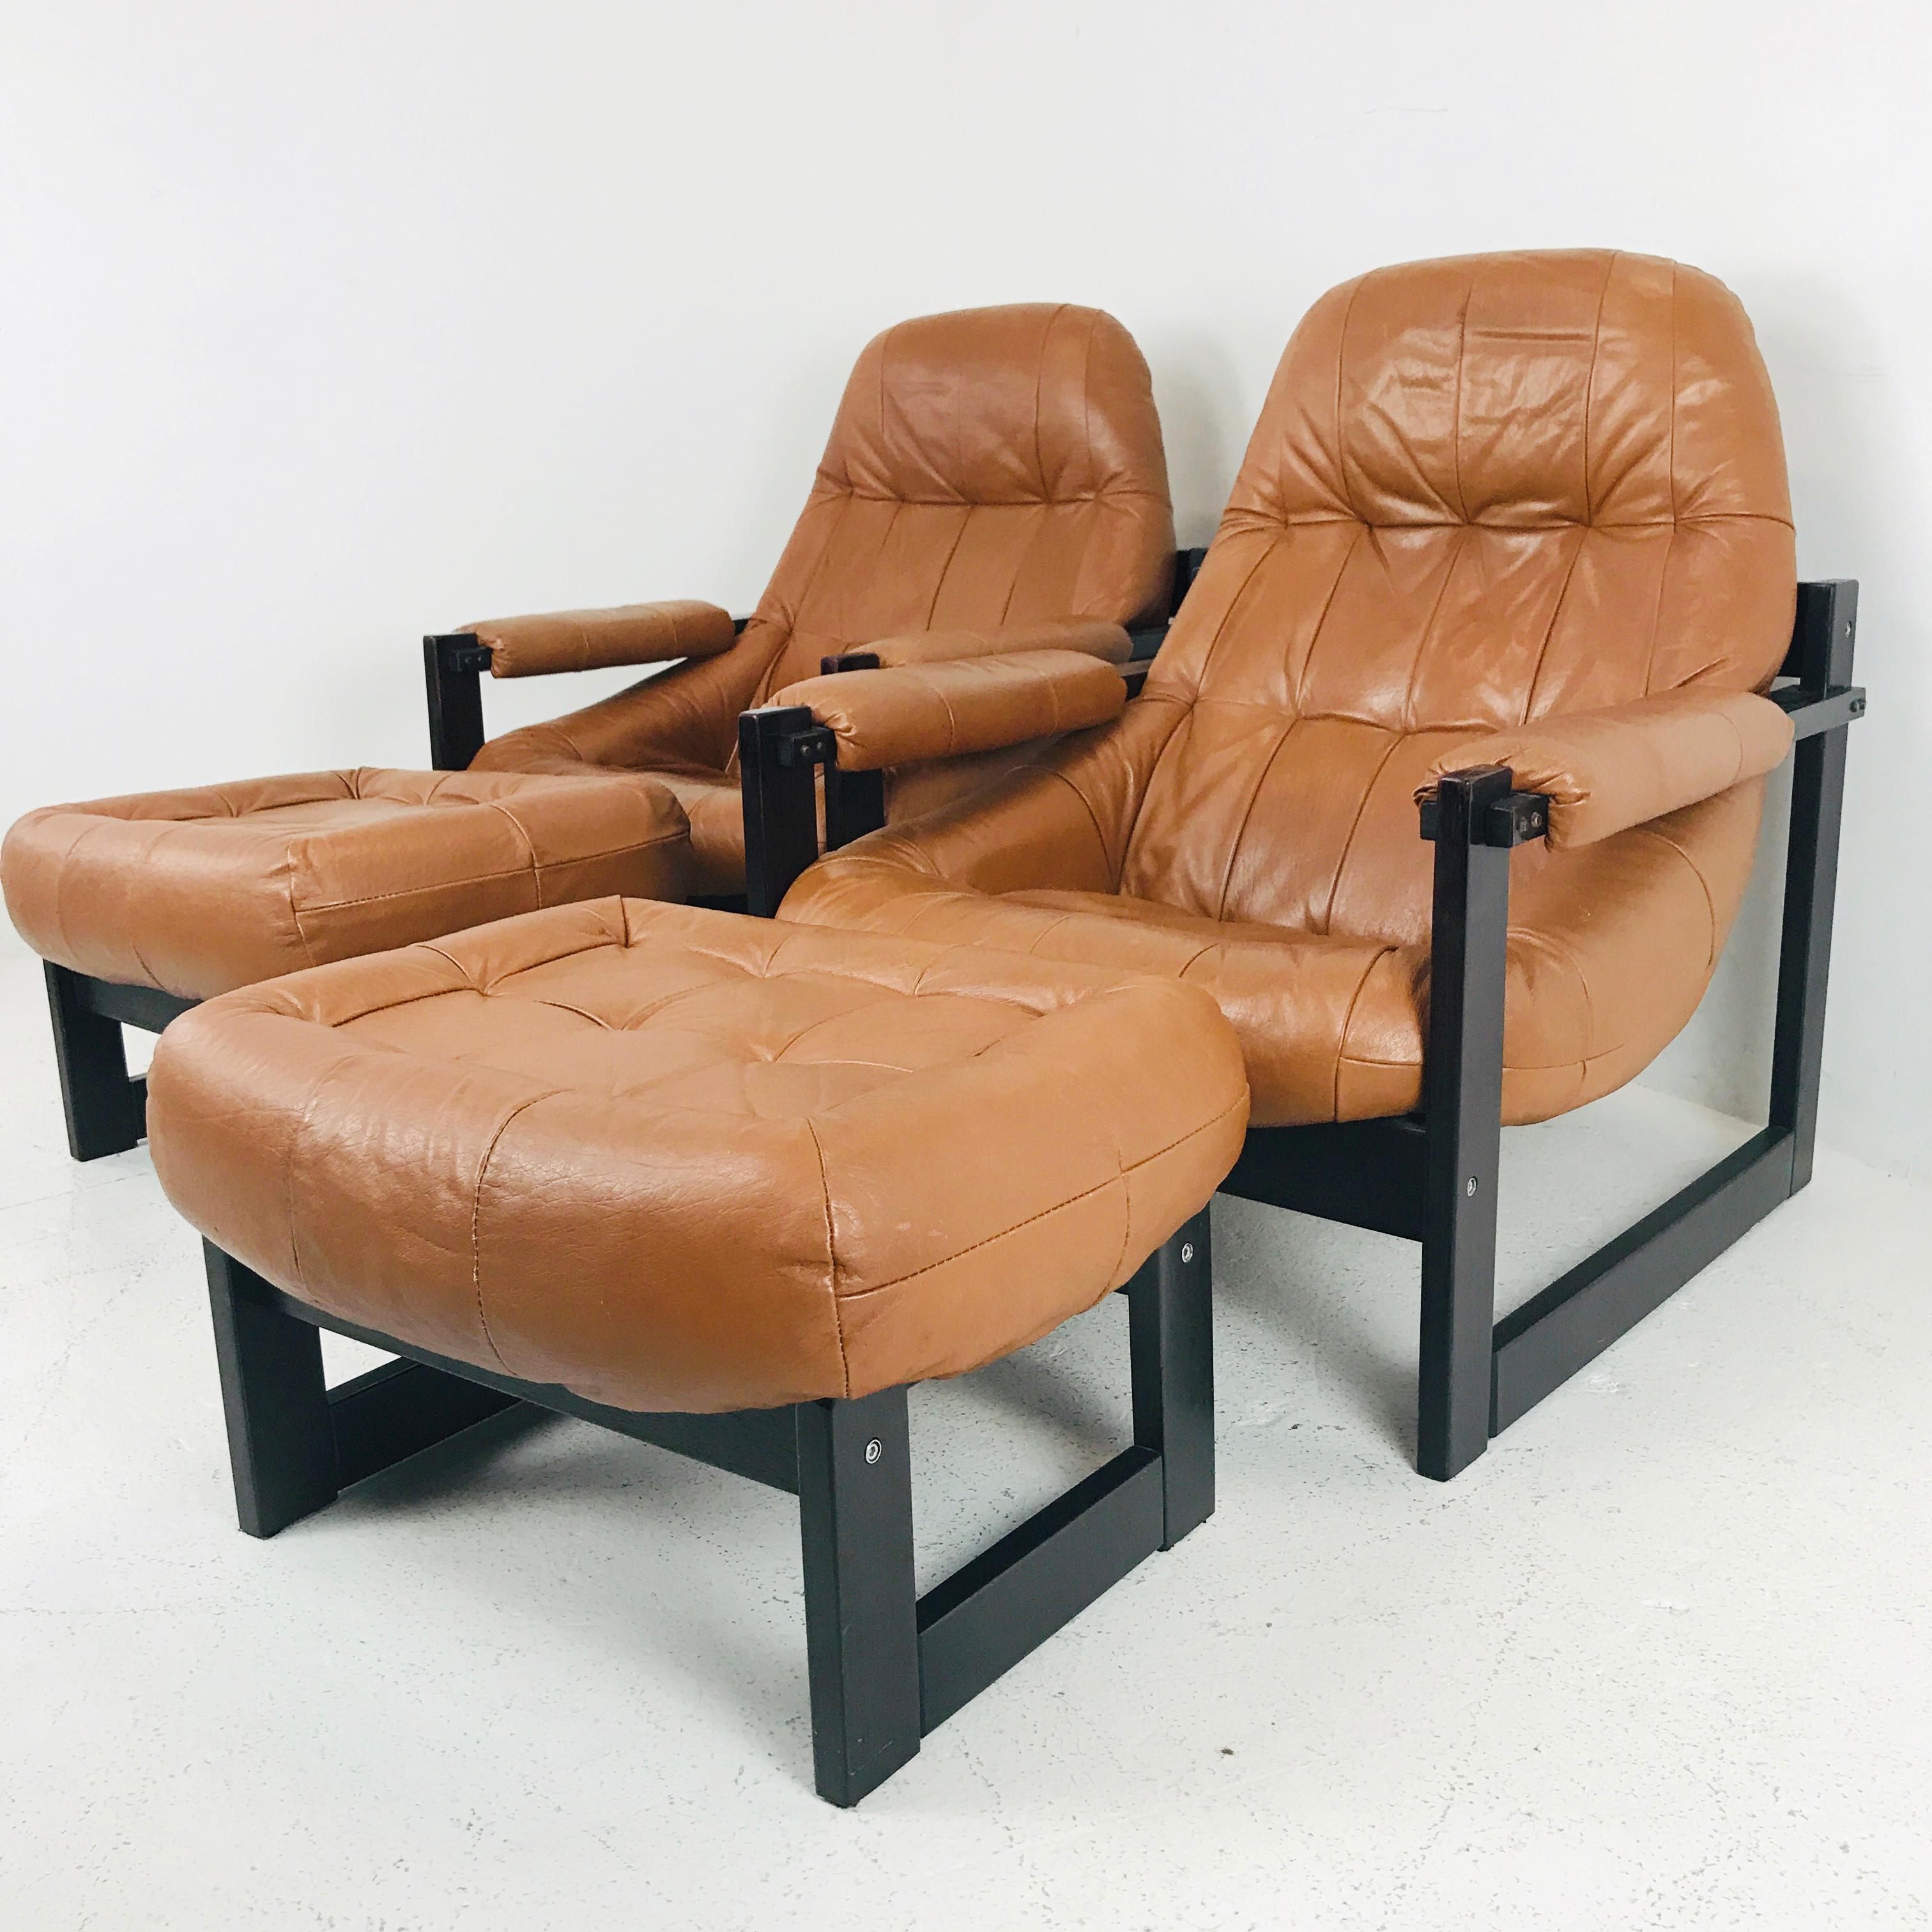 Pair of Percival Lafer leather and wood lounge chairs and ottomans. Chairs are in good vintage condition with wear consistent with age and use. See photos.

Dimensions:
31 W x 33 D x 34.5 H
Seat height 15.